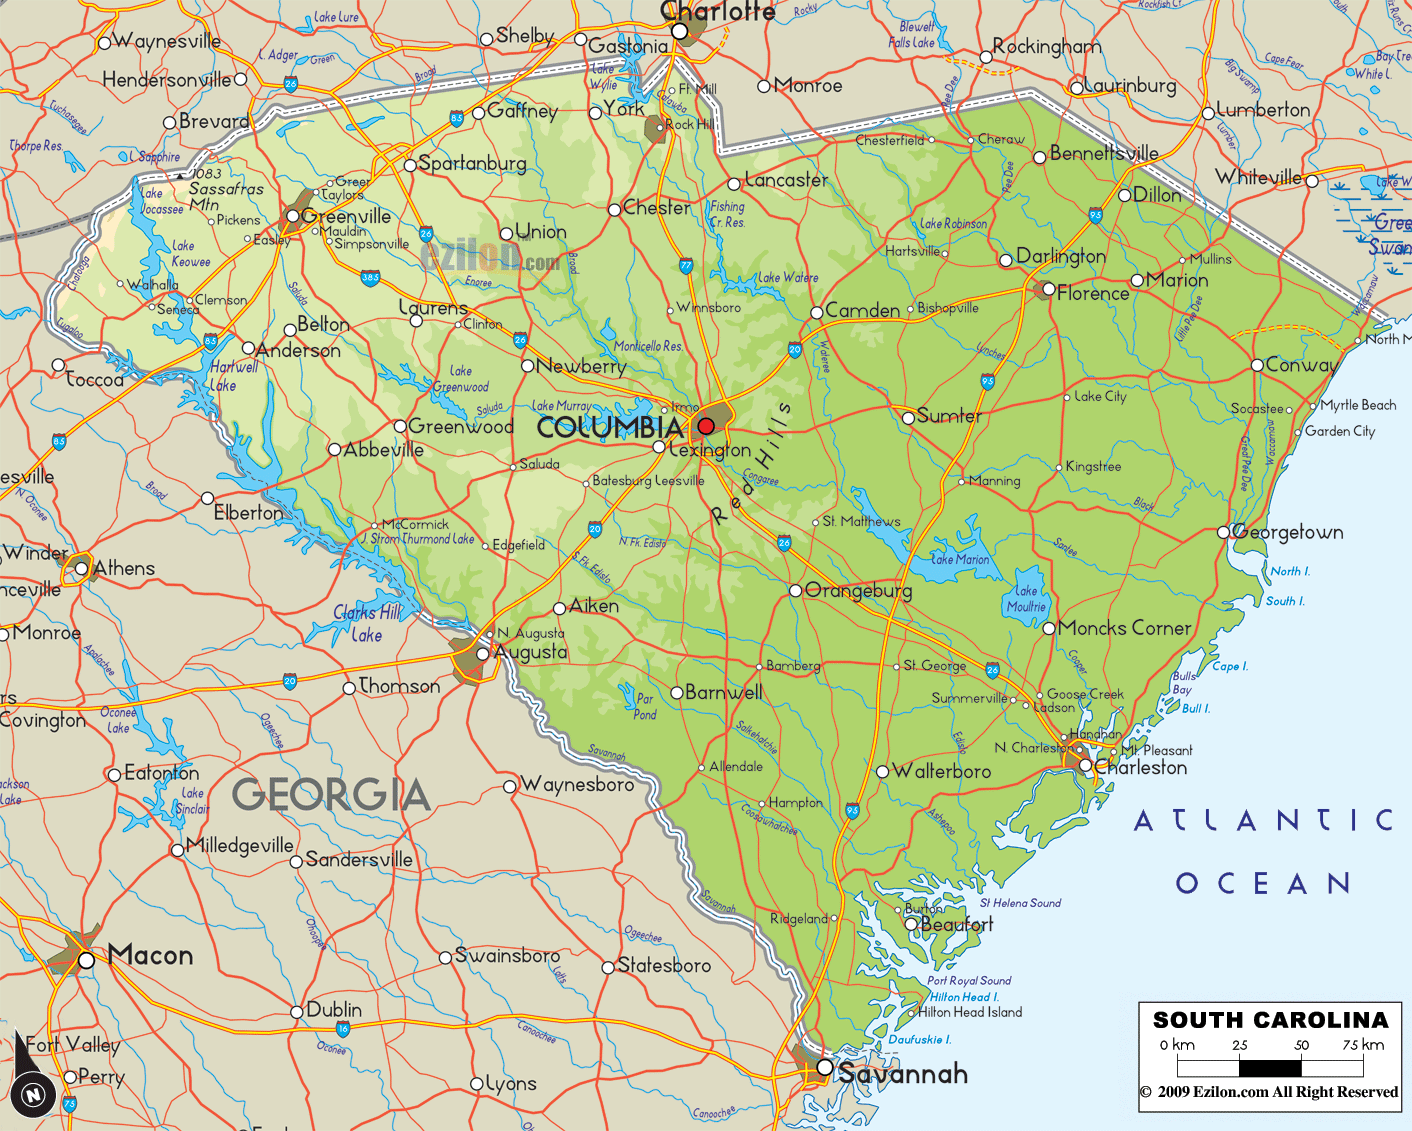 Detailed physical map of South Carolina State, USA showing major geographical features such as rivers, lakes, coastline, topography and land formations.